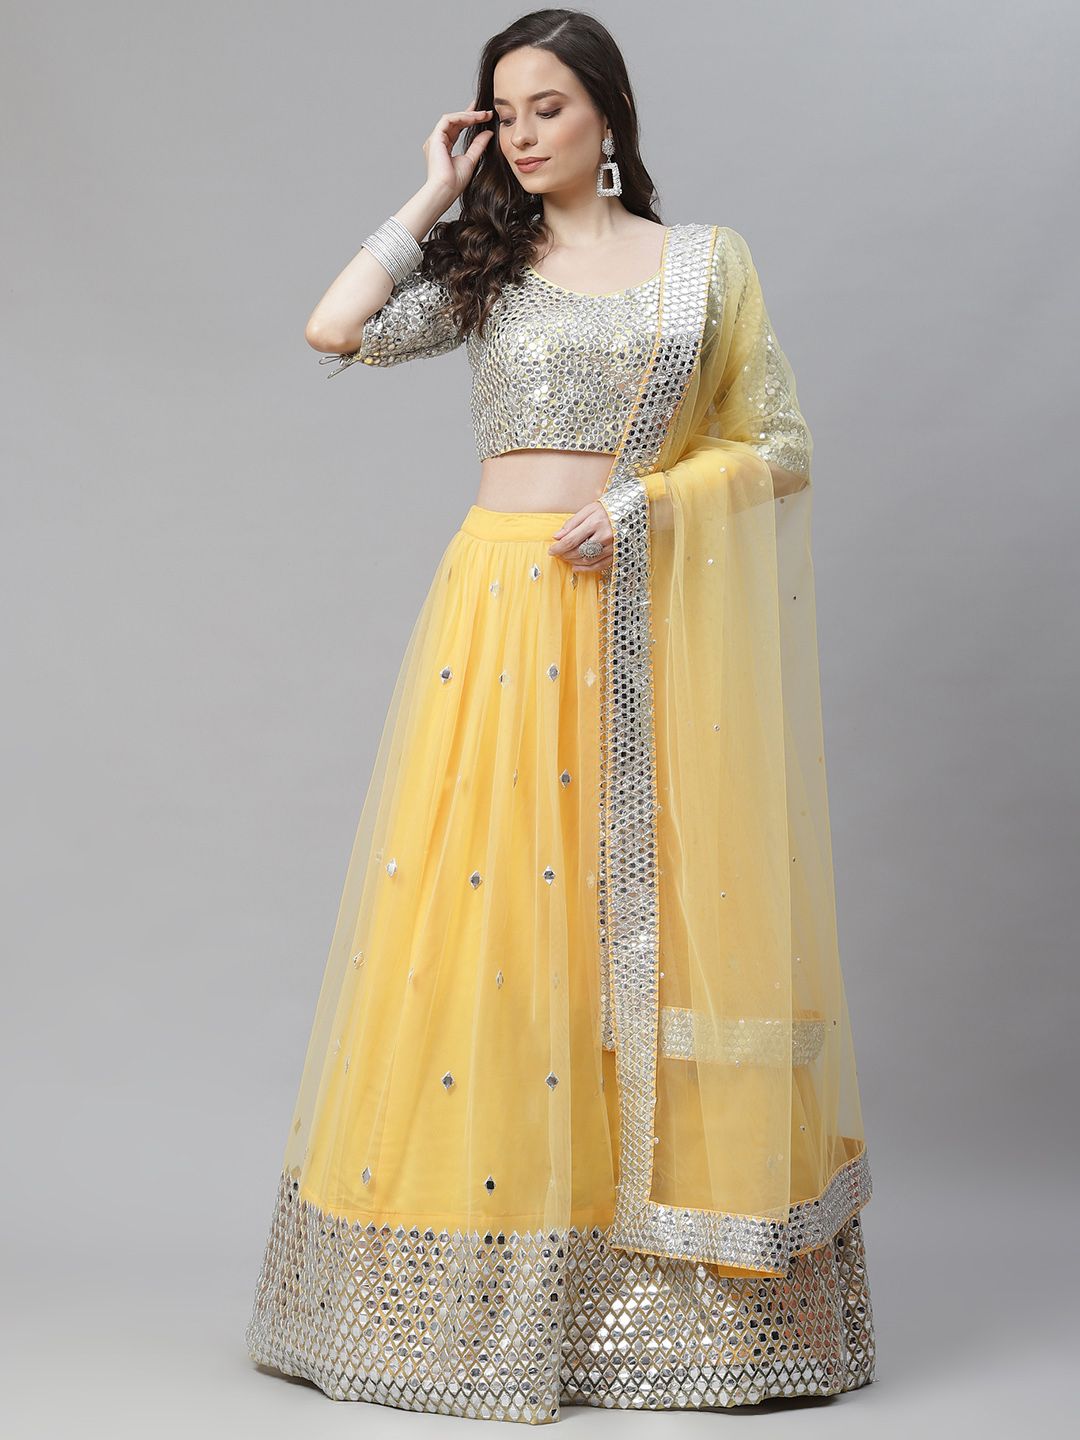 Readiprint Fashions Yellow & Silver-Toned Mirror Work Semi-Stitched Lehenga & Blouse With Dupatta Price in India